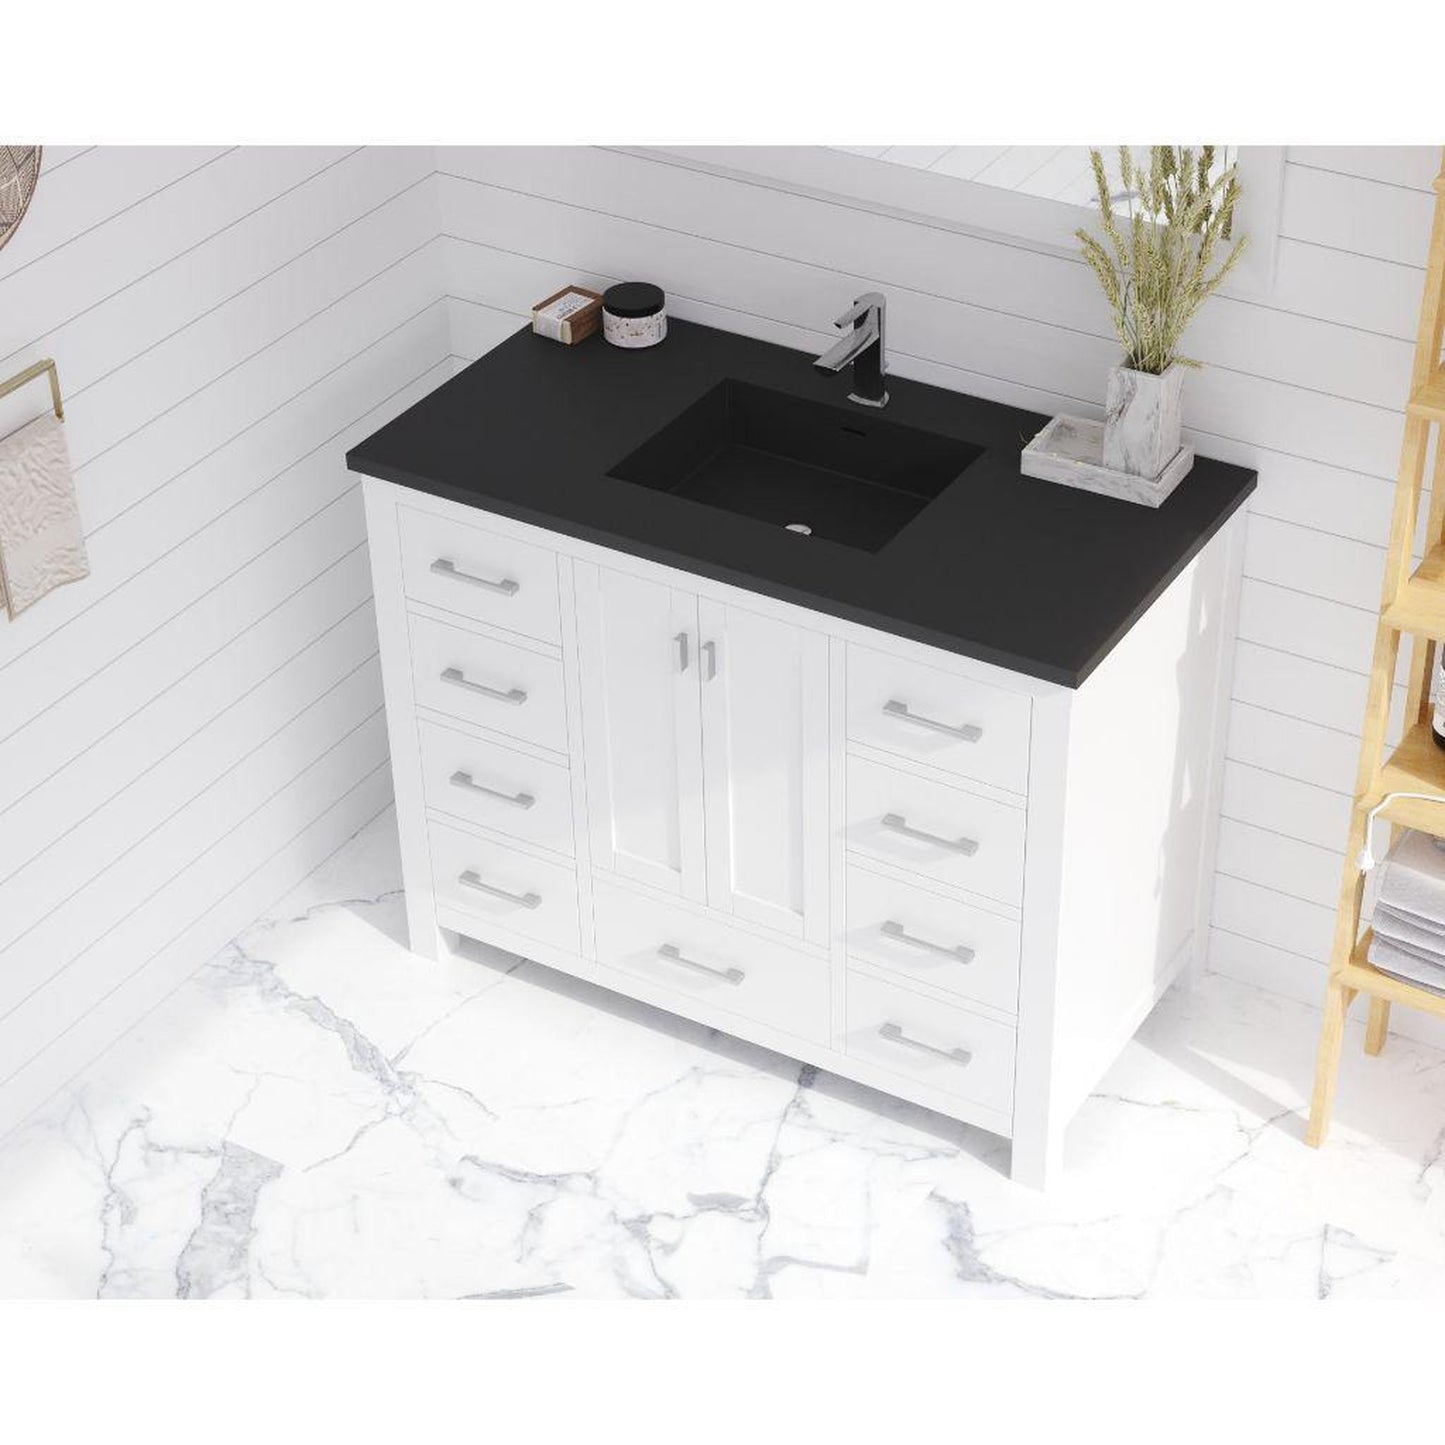 Laviva Forever 42" Matte Black Viva Stone Solid Surface Countertop With Integrated Sink